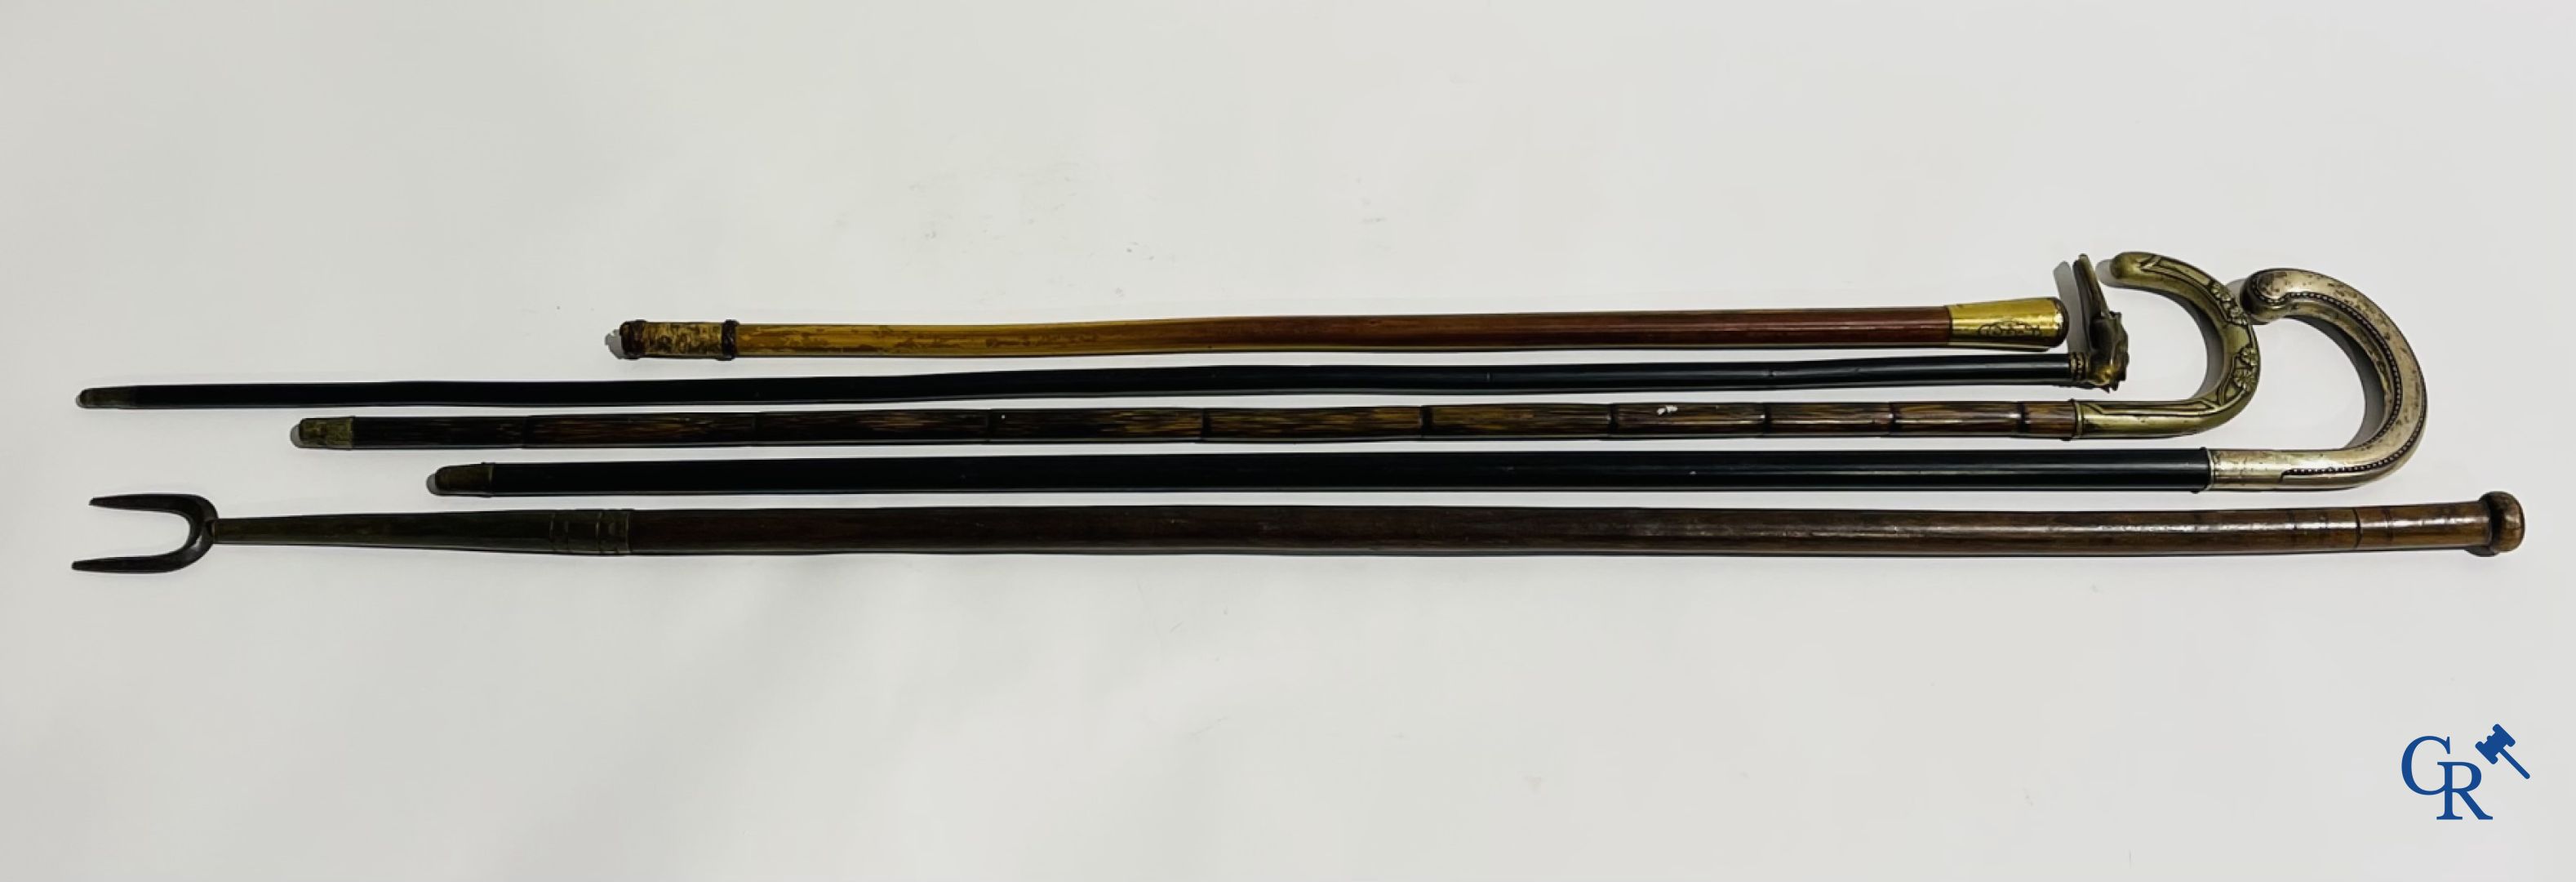 5 walking sticks including 1 with silver handle. - Image 2 of 4